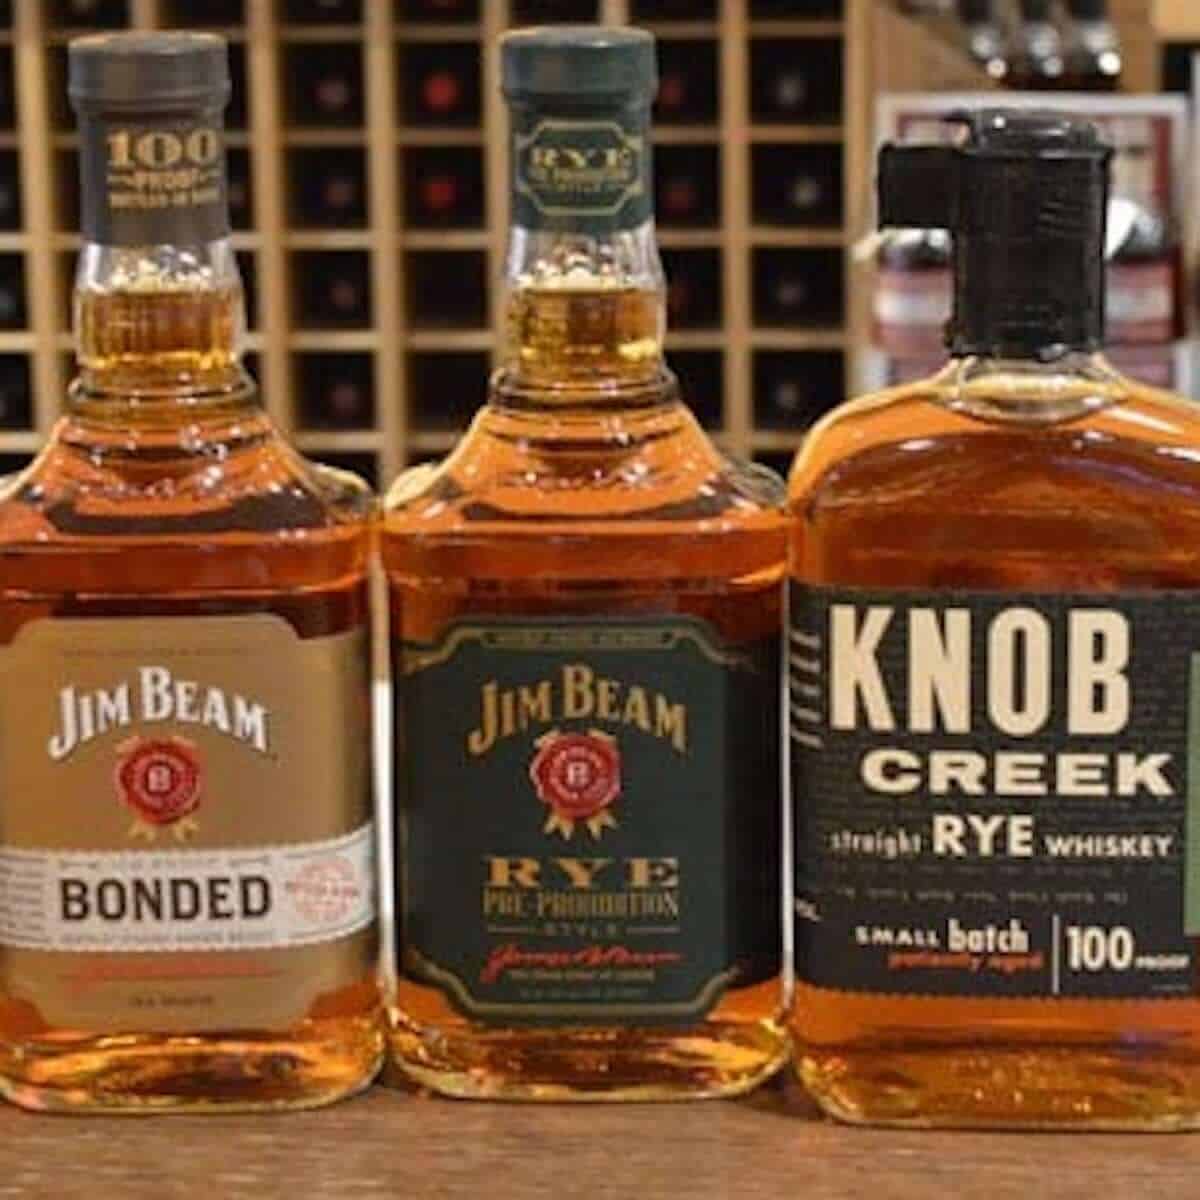 Jim Beam & Knob Creek bourbons and ryes in bottles on a counter.